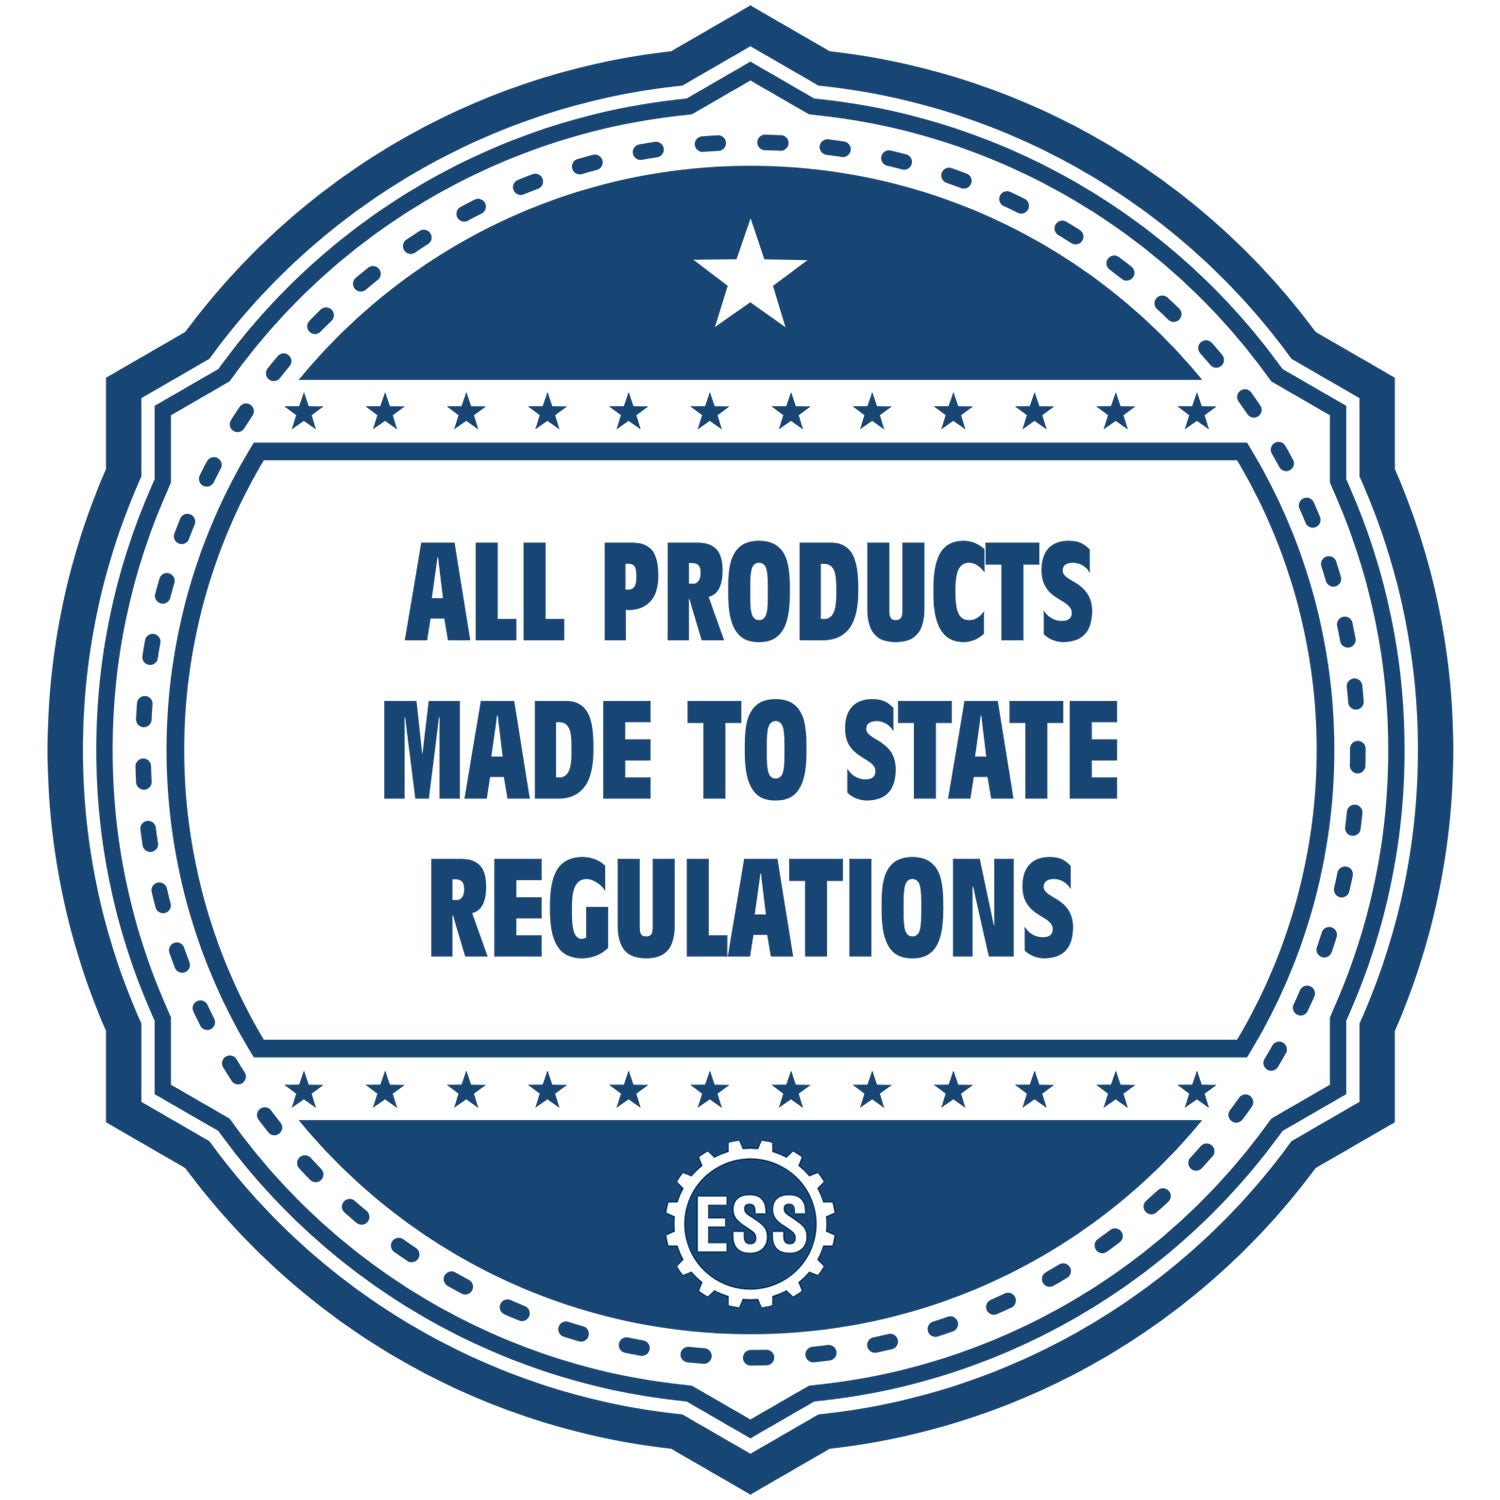 An icon or badge element for the Handheld Virginia Land Surveyor Seal showing that this product is made in compliance with state regulations.